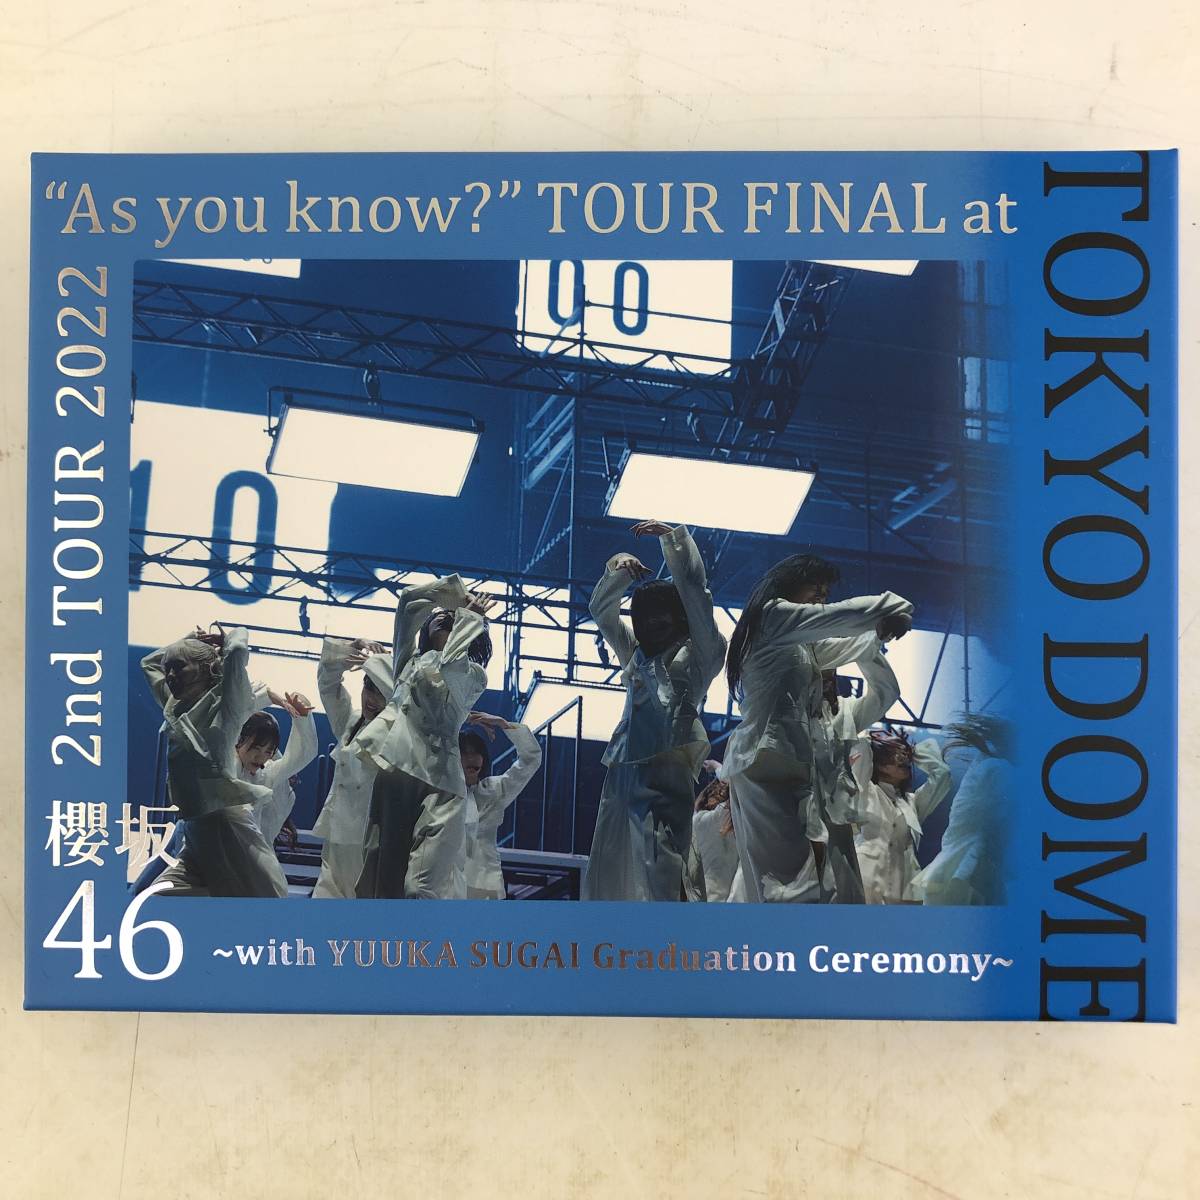 【Blu-ray】櫻坂46 2nd TOUR 2022 ”As you know?” TOUR FINAL at 東京ドーム ～with YUUKA SUGAI Graduation Ceremony [完全生産限定盤]_画像1